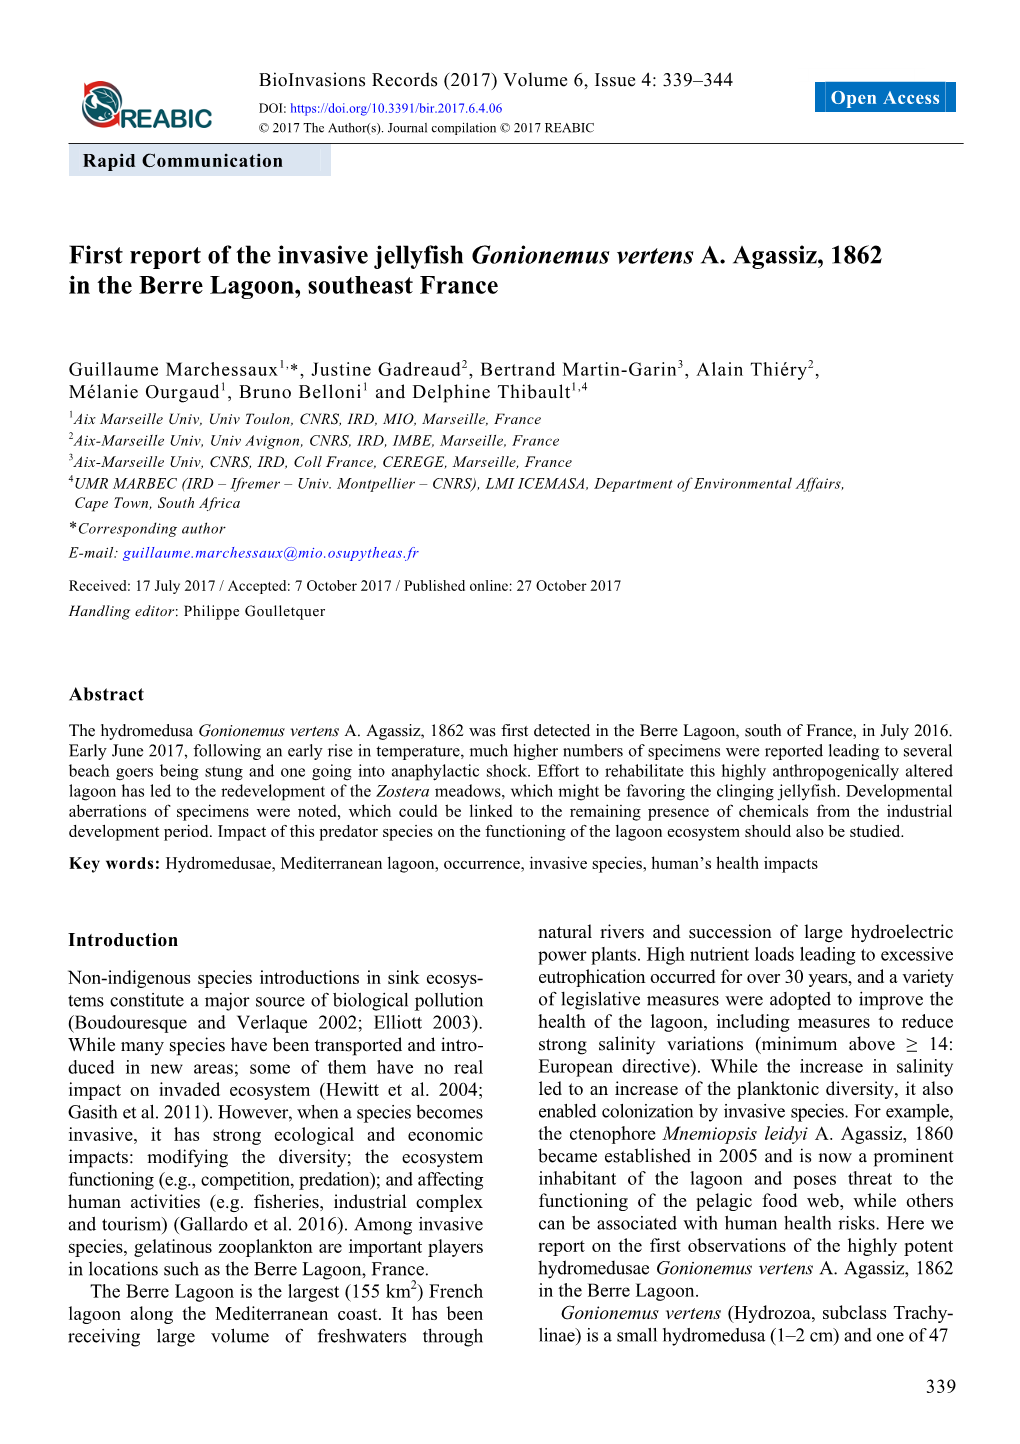 First Report of the Invasive Jellyfish Gonionemus Vertens A. Agassiz, 1862 in the Berre Lagoon, Southeast France